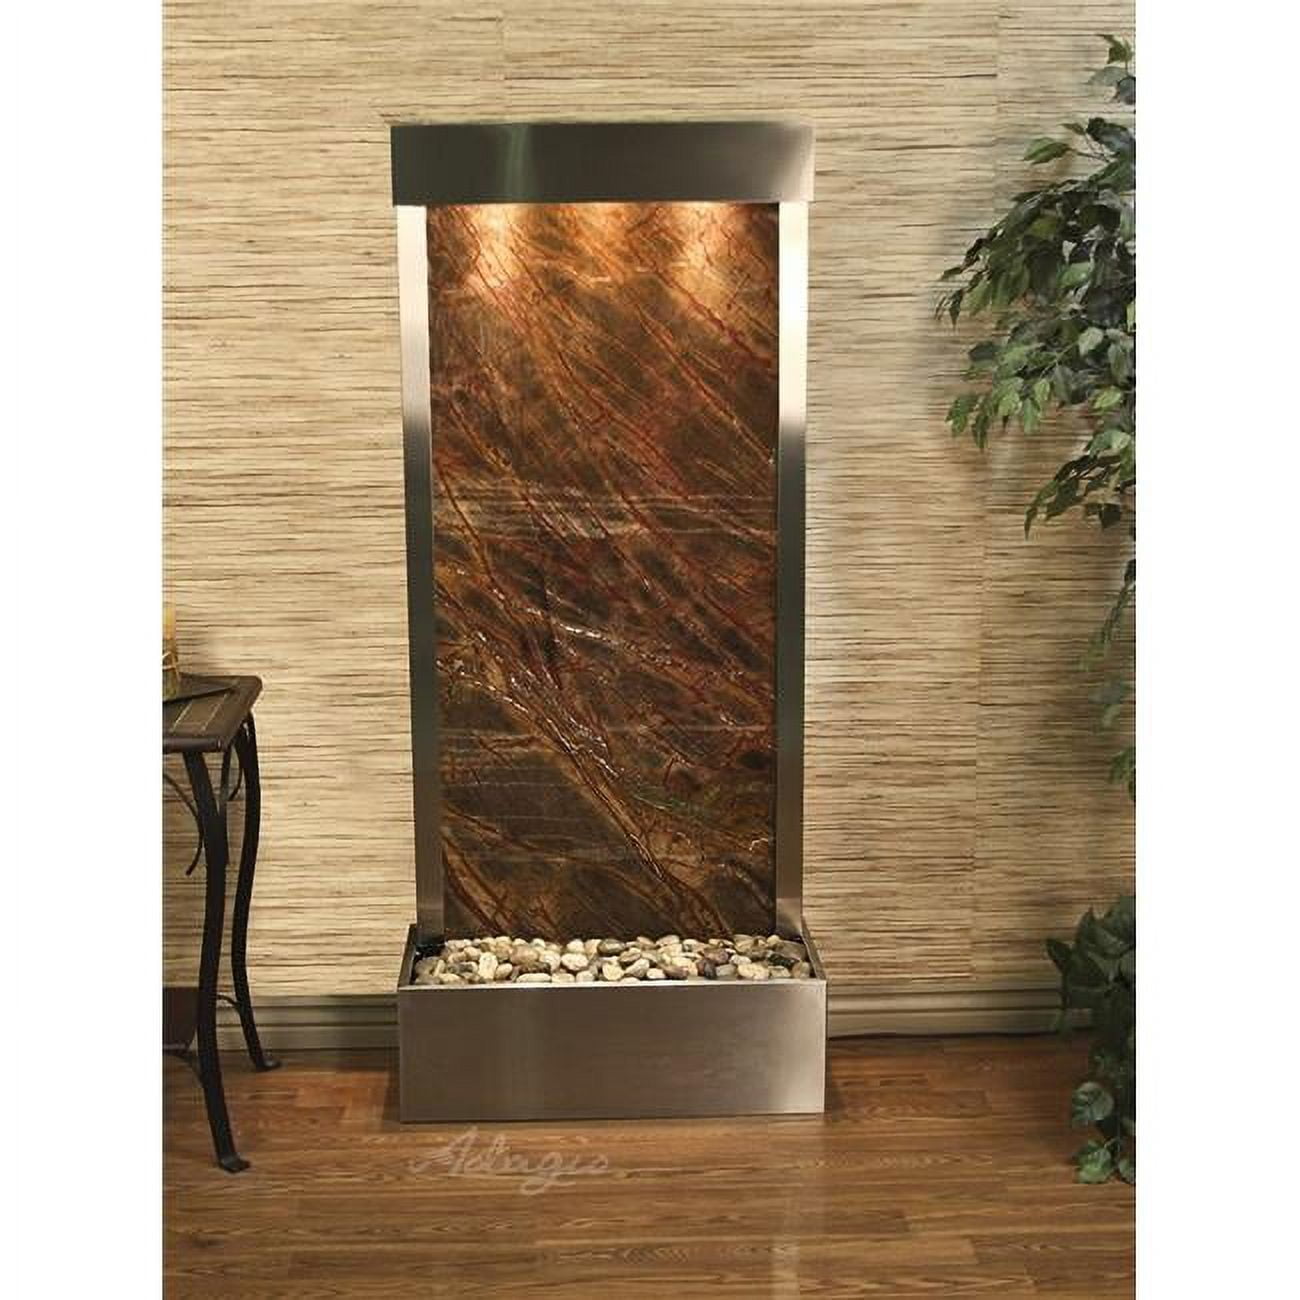 Adagio HRF2006 Harmony River Flush Mount Stainless Steel Brown Marble Wall Fountain